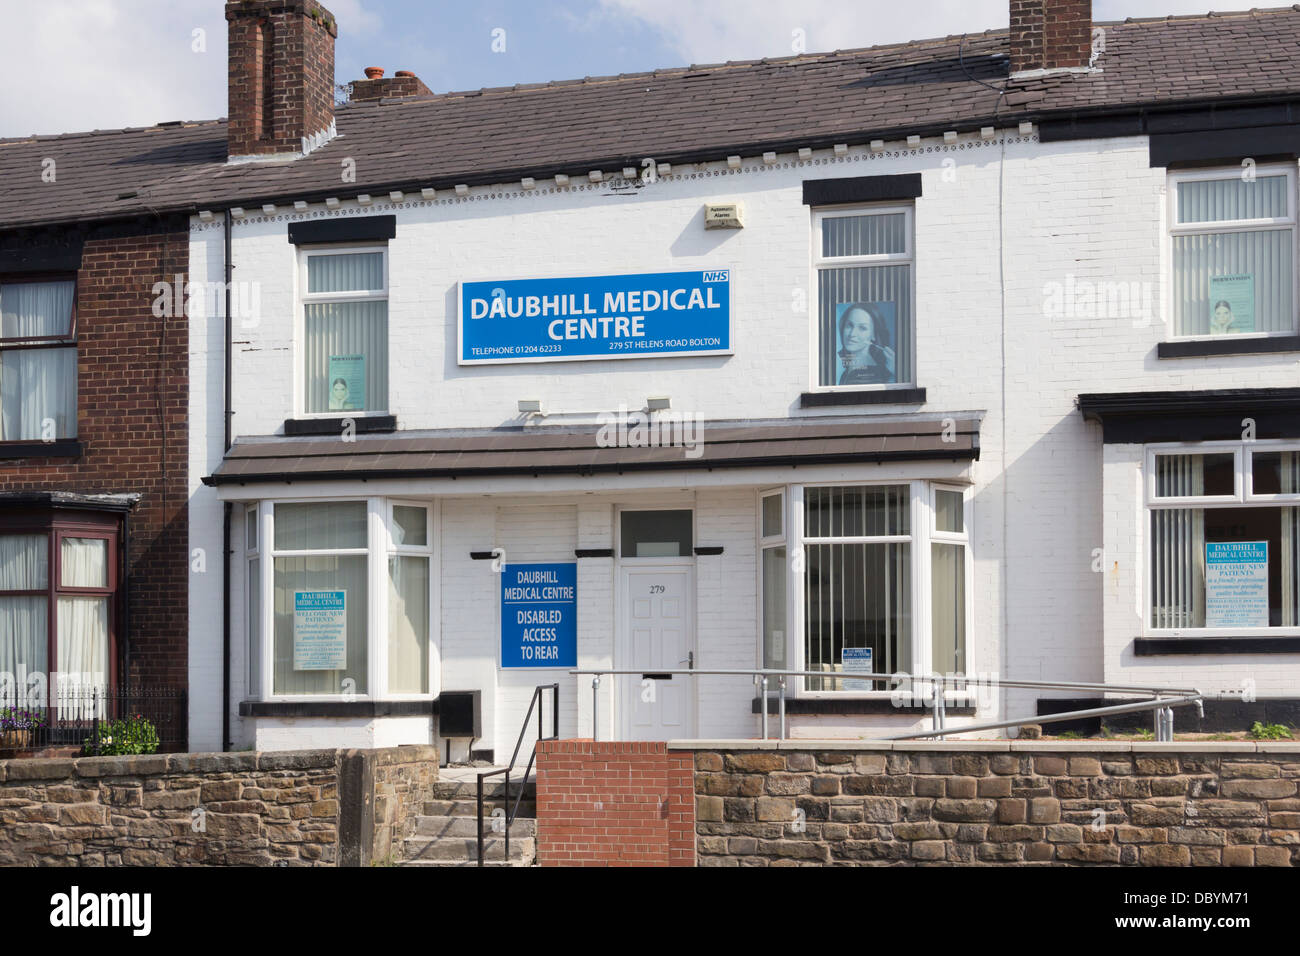 Daubhill Medical Centre on St. Helens Road in the Daubhill area of Bolton, part of the Deane and Daubhill Medical Centre. Stock Photo